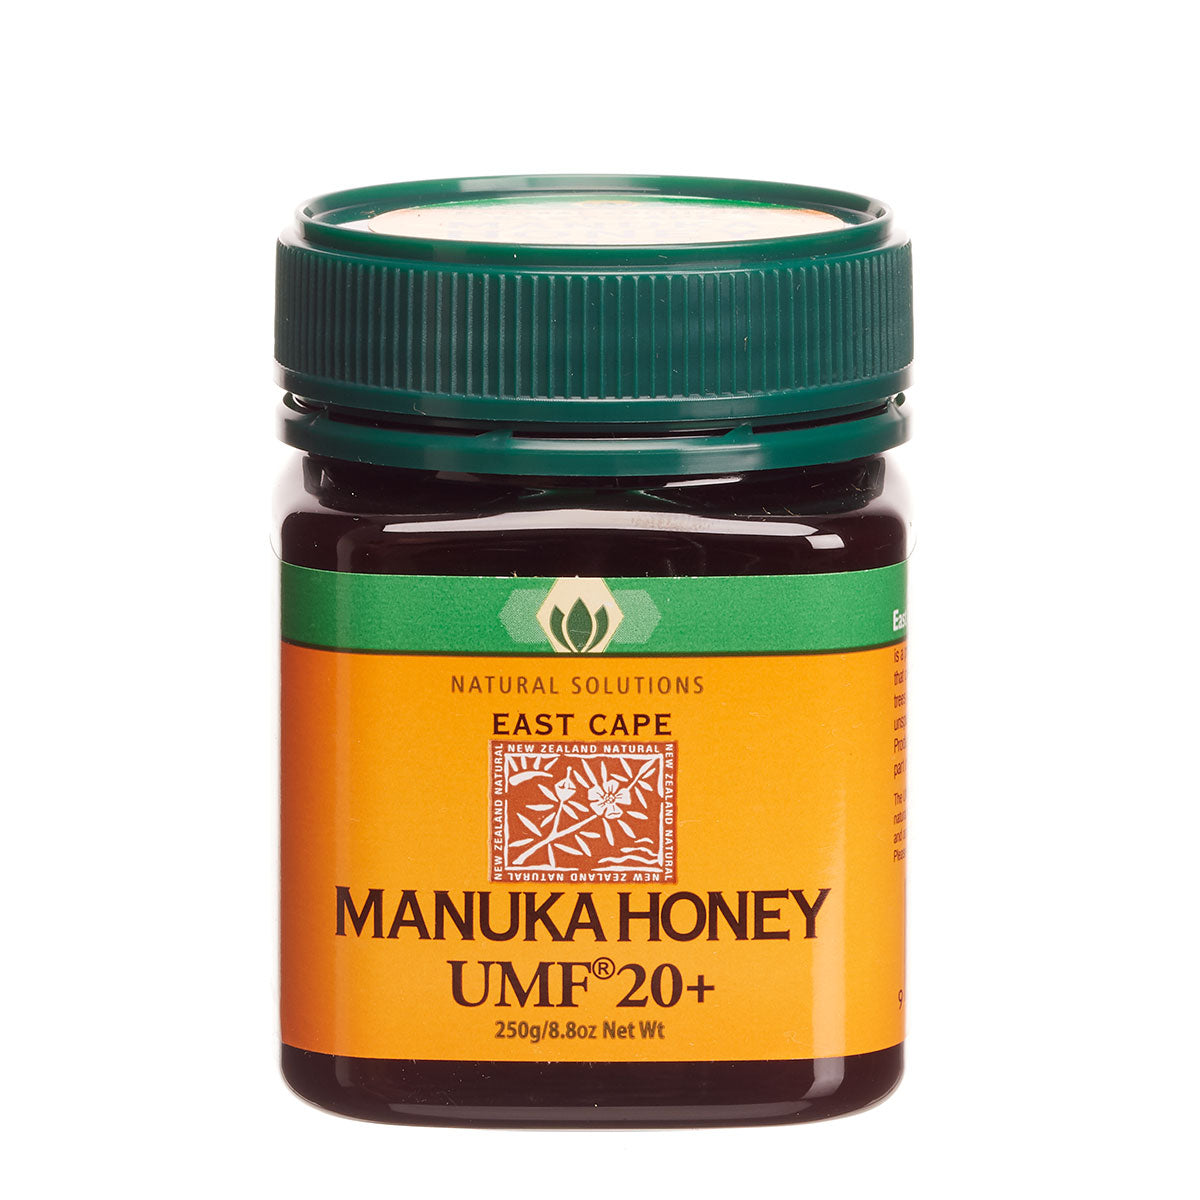 How Manuka honey is tested and rated